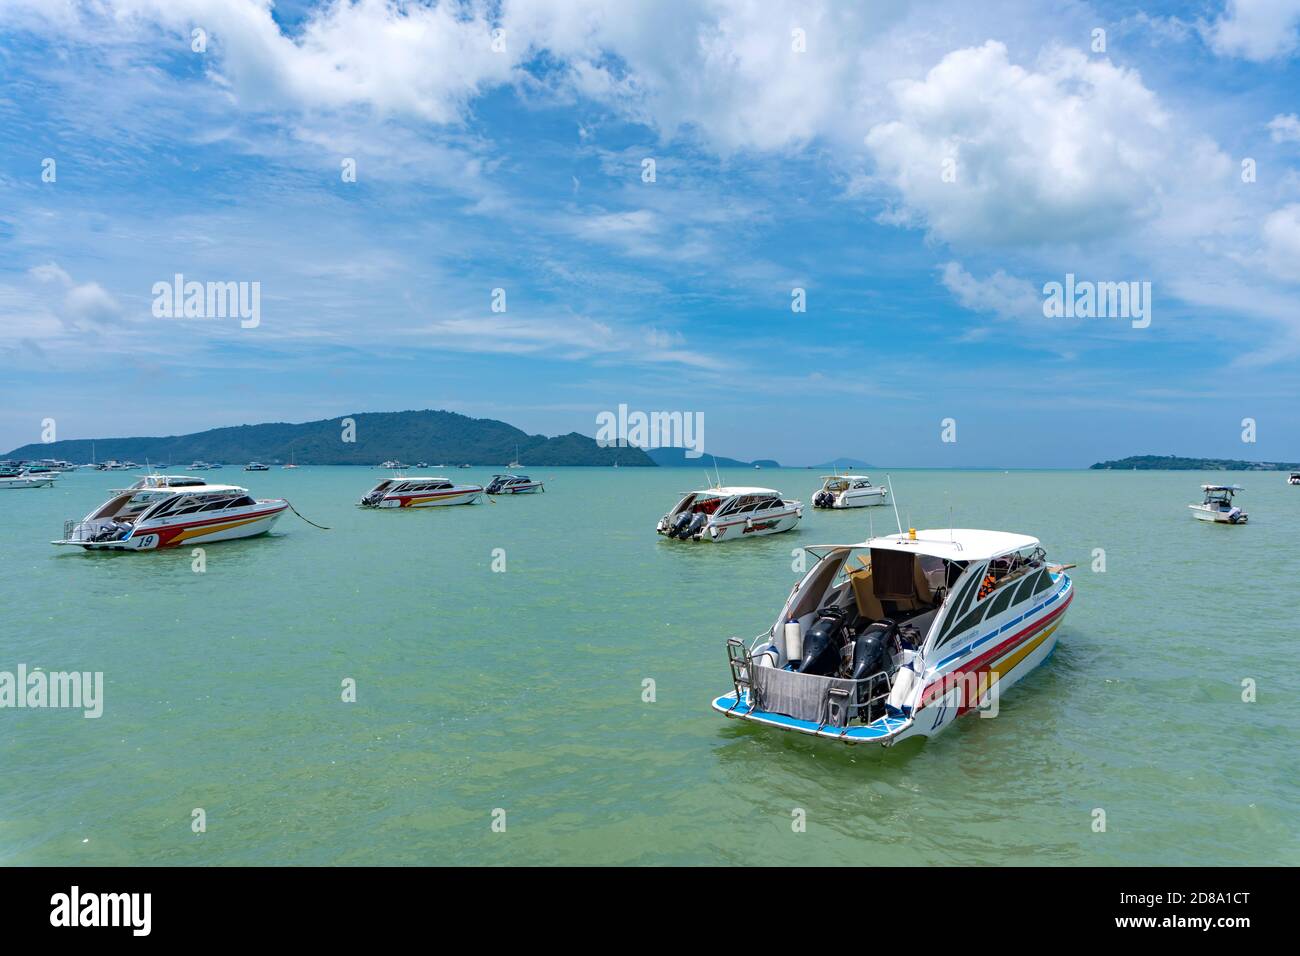 Phuket, Thailand - August 06, 2020: Group of speed boats park at Chalong Bay Pier. Stock Photo